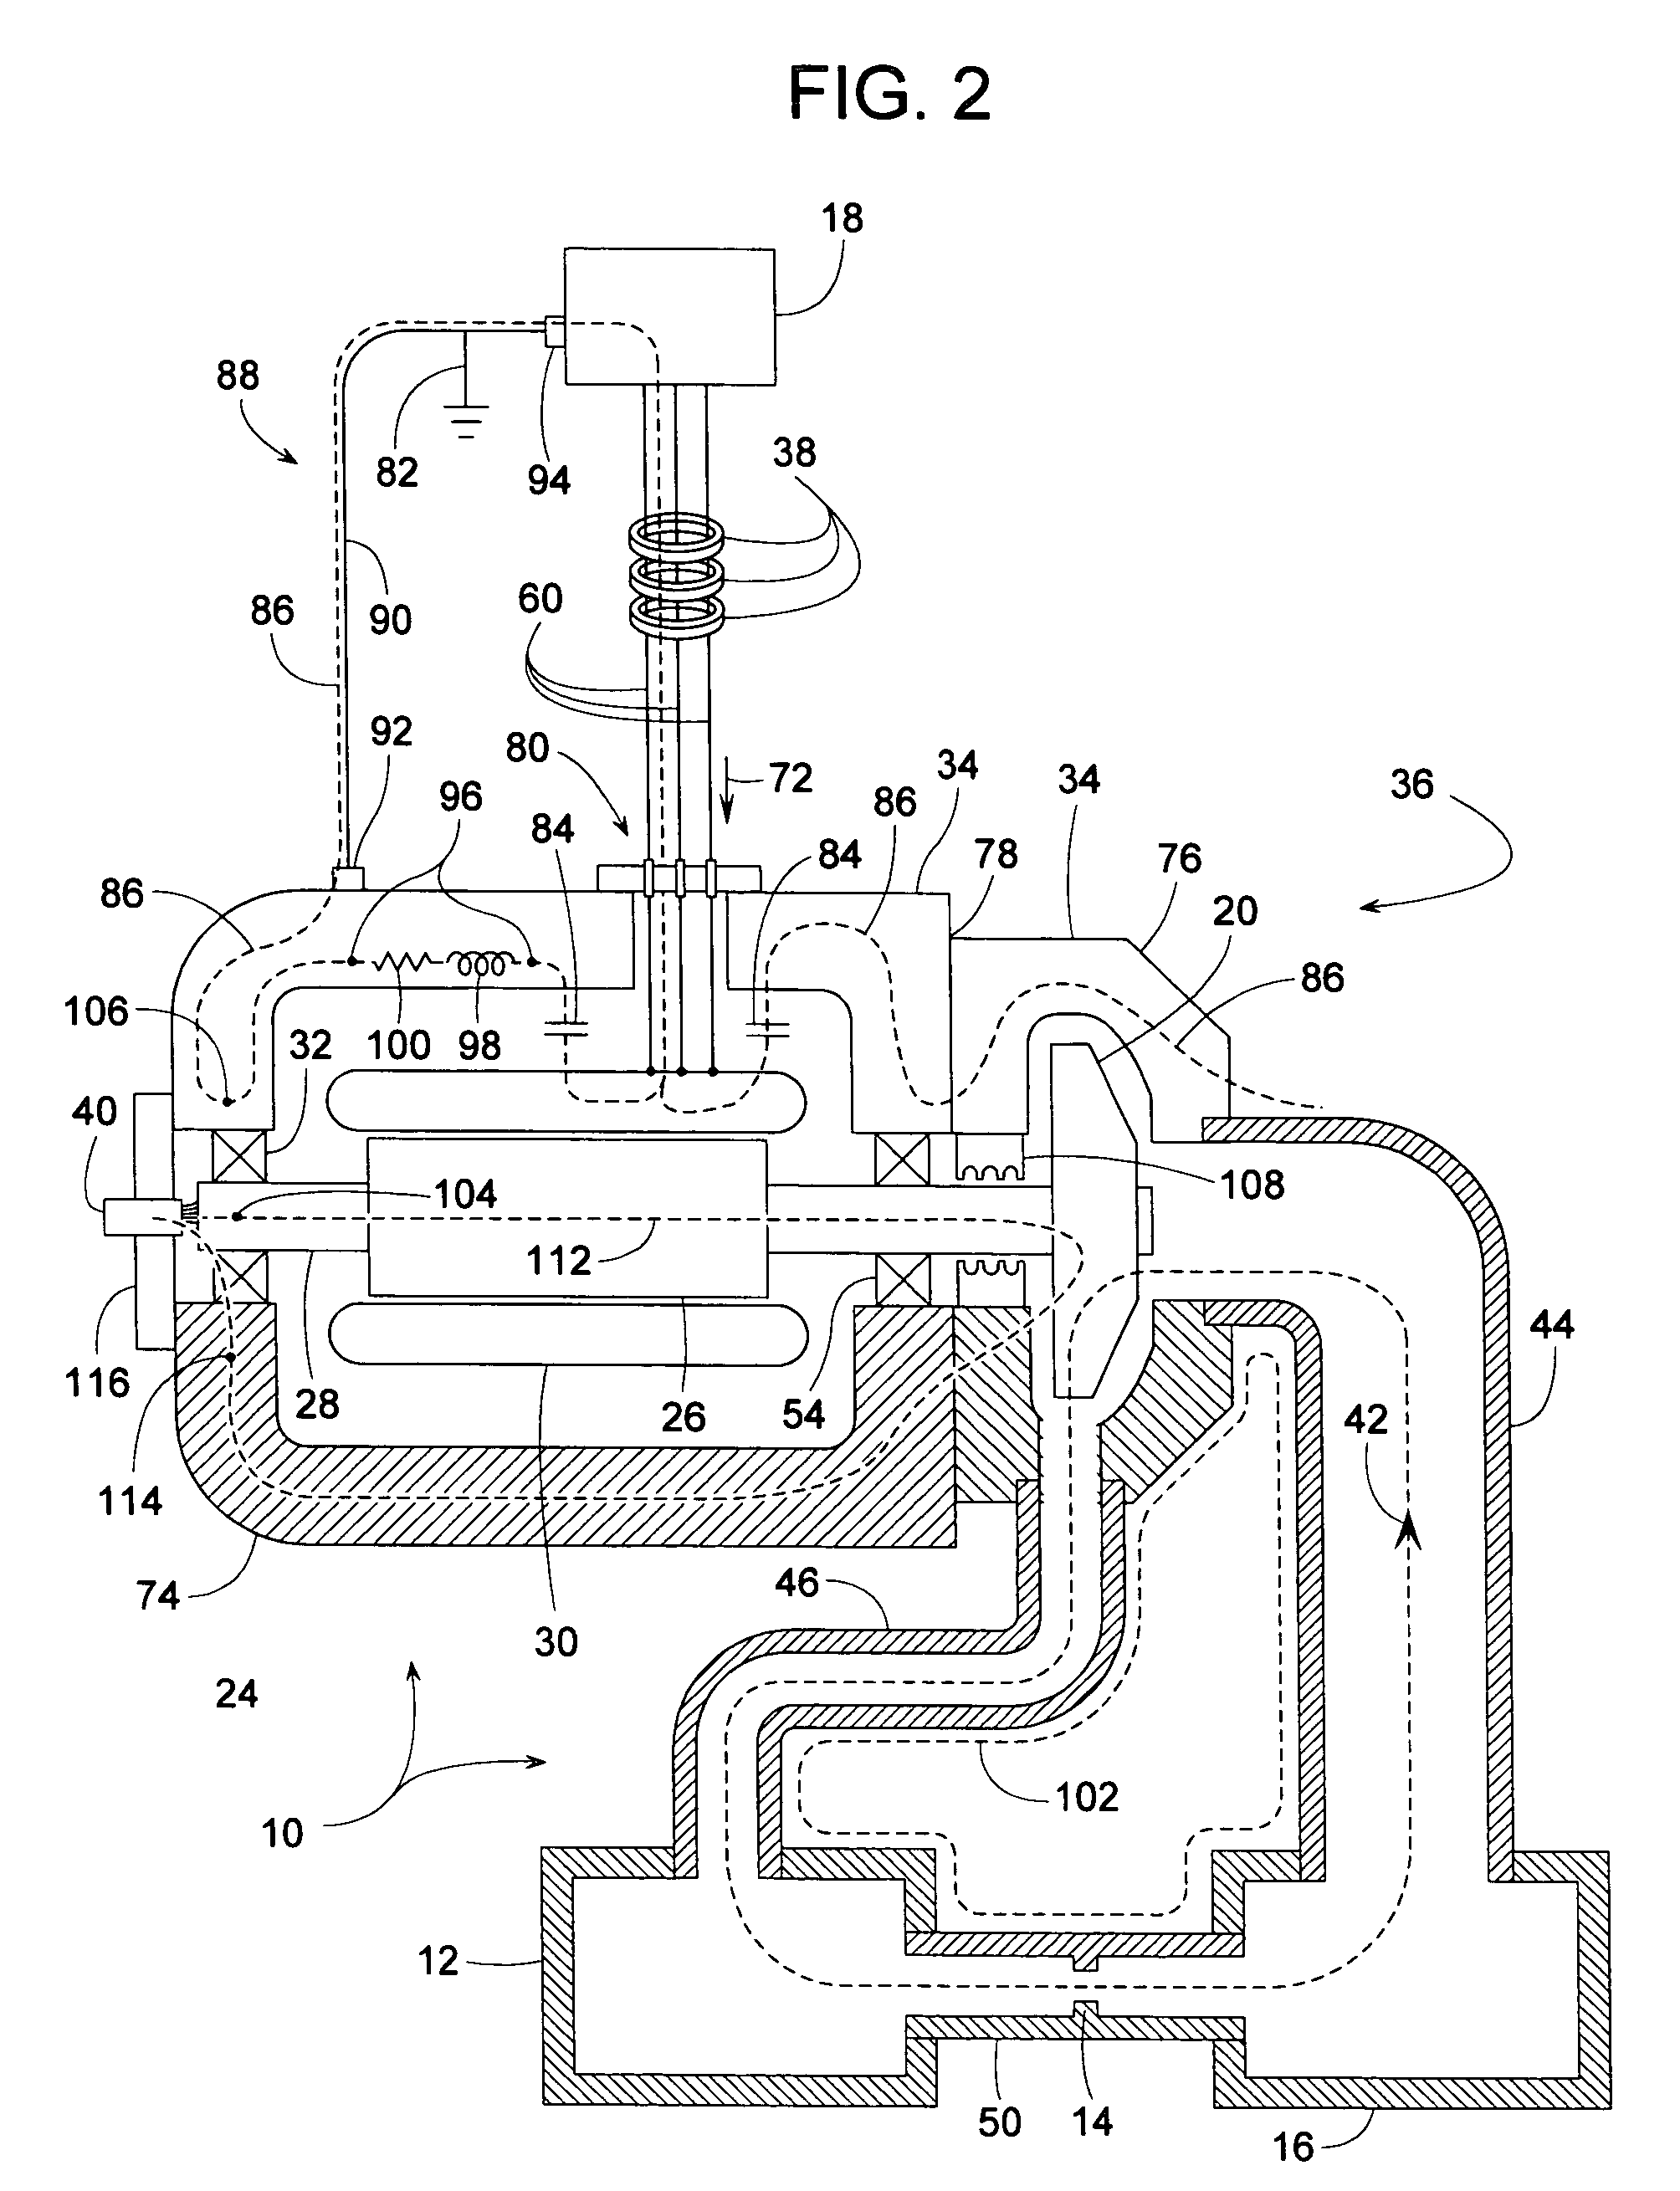 System for protecting bearings and seals of a refrigerant compressor